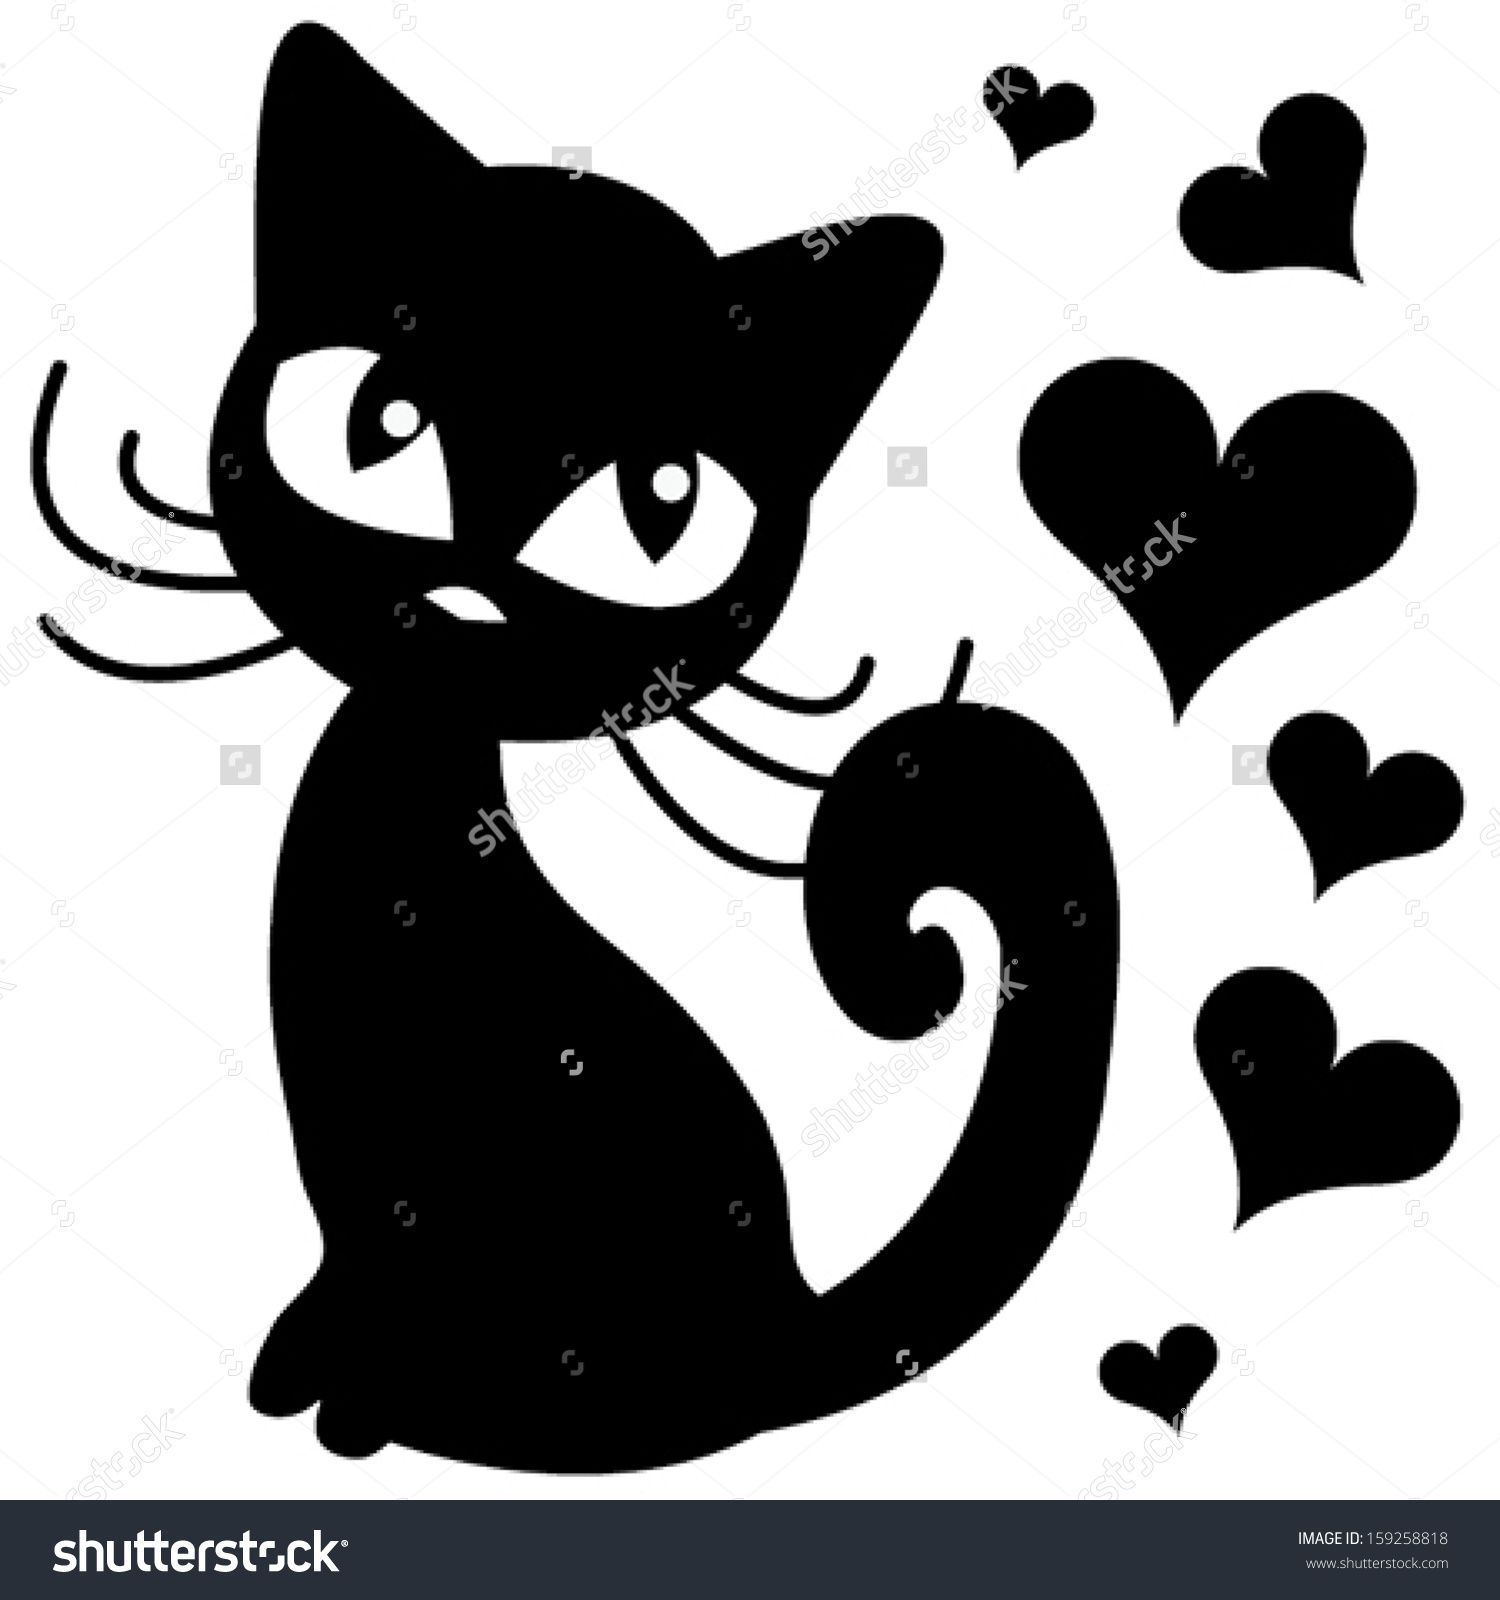 Download Kitten Silhouette Vector at Vectorified.com | Collection ...